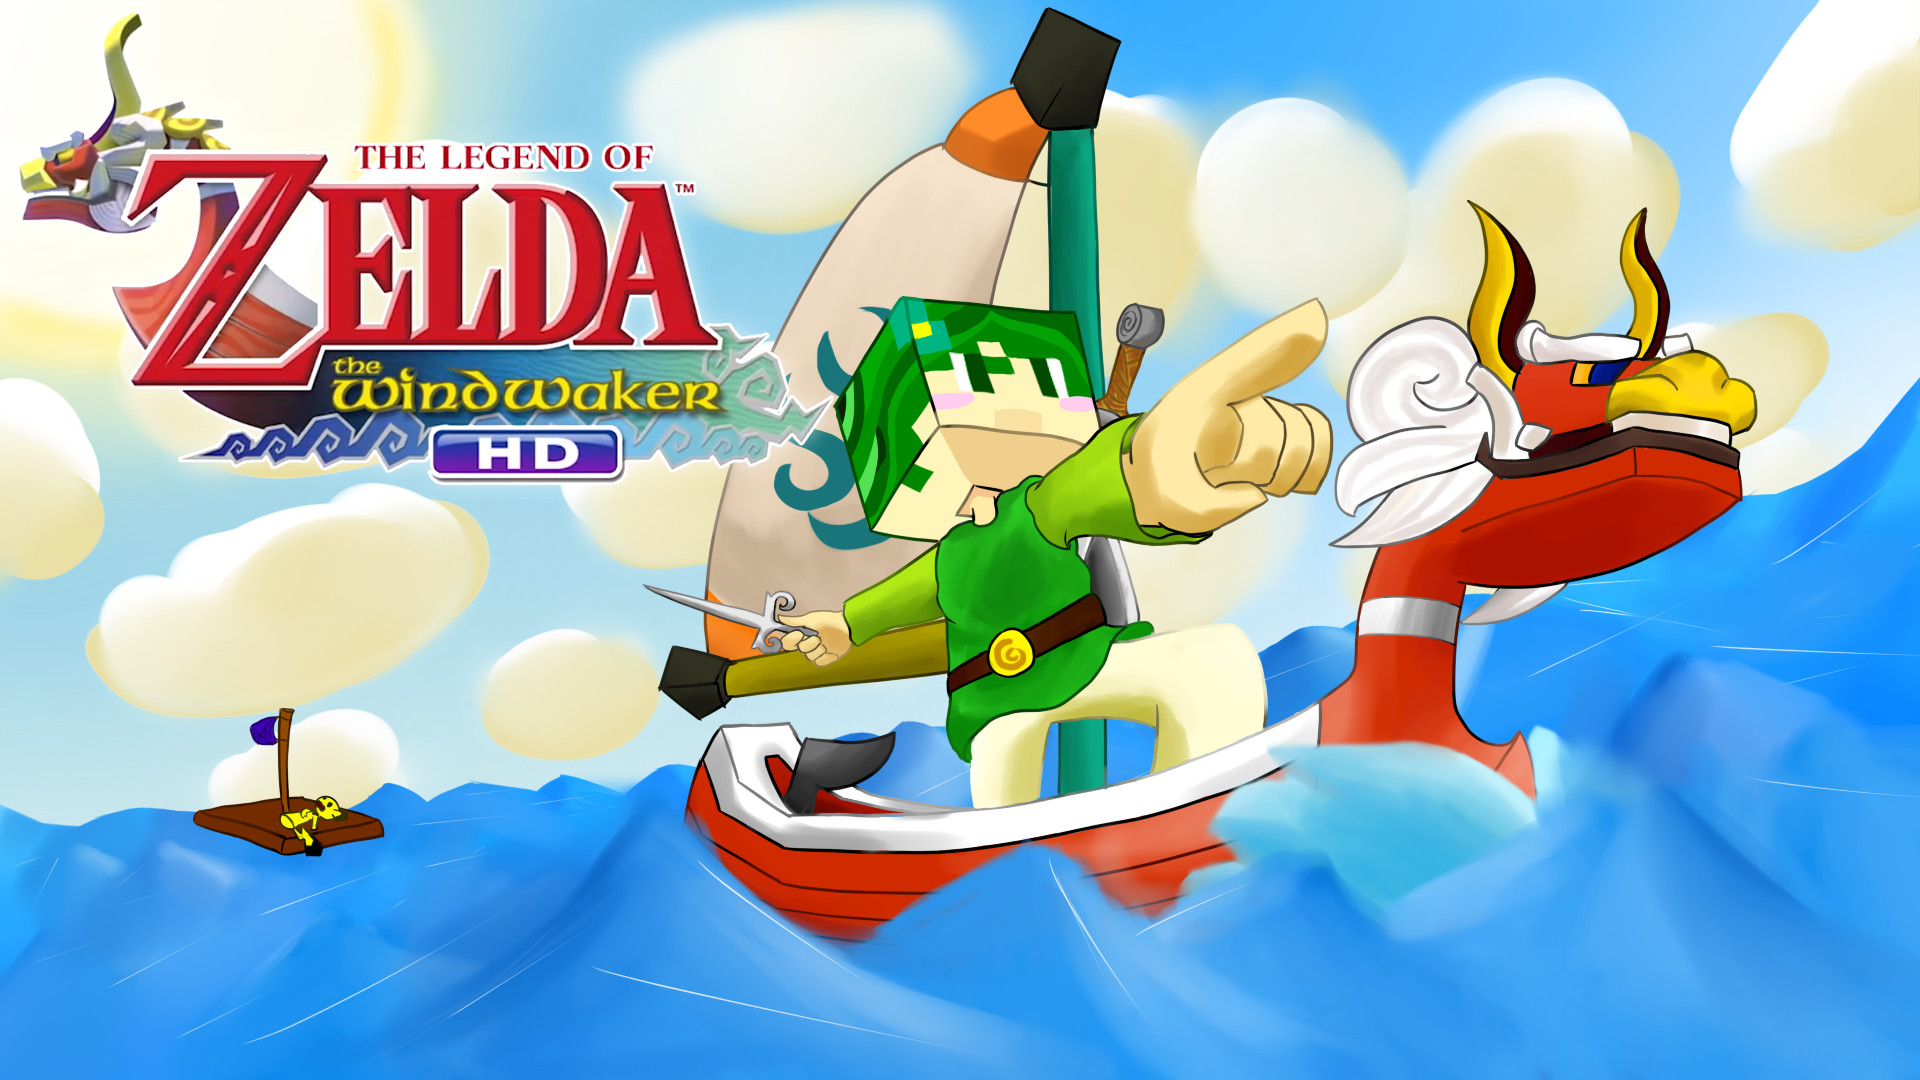 1920x1080 ... Legend of Zelda: The Wind Waker HD Thumbnail :D by BananaPsycho